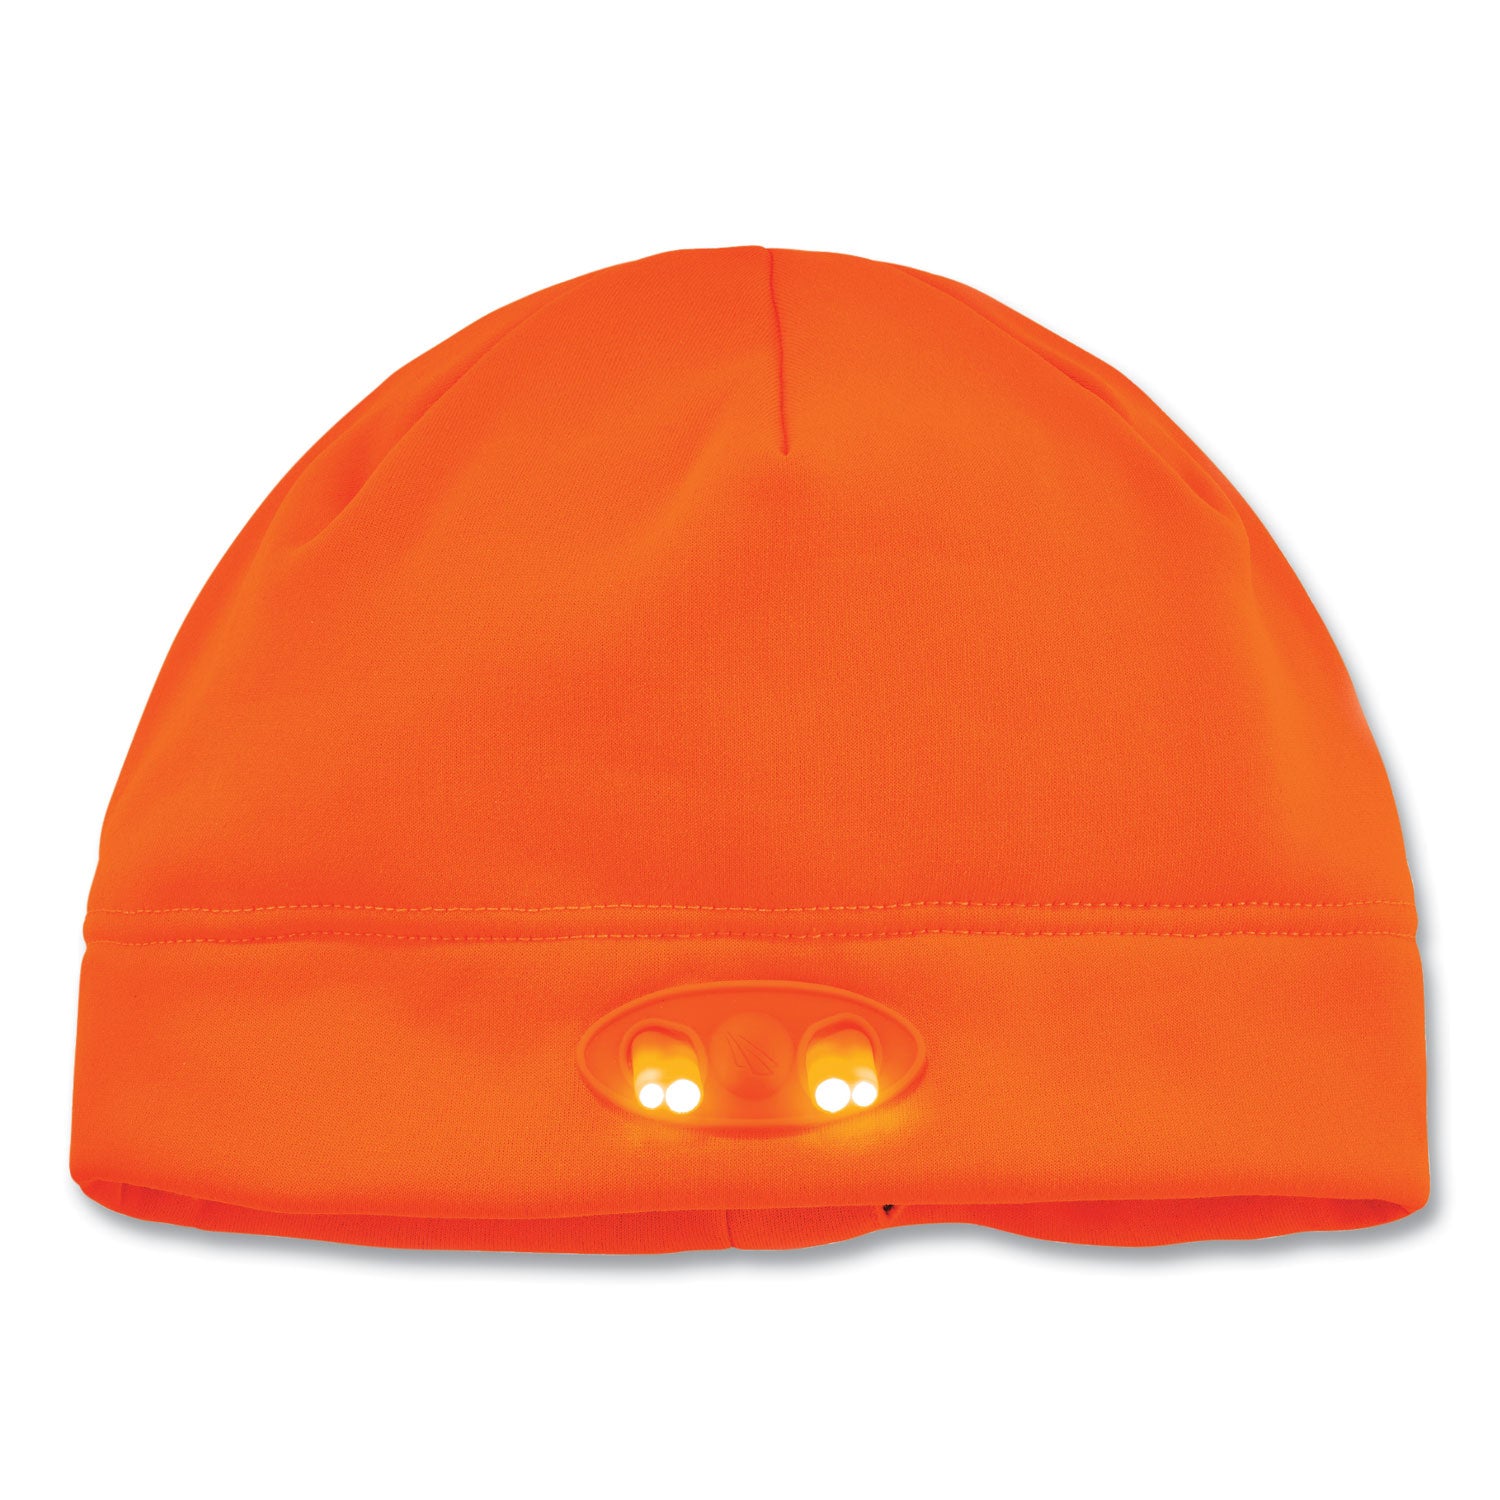 n-ferno-6804-skull-cap-winter-hat-with-led-lights-one-size-fits-most-orange-ships-in-1-3-business-days_ego16804 - 1